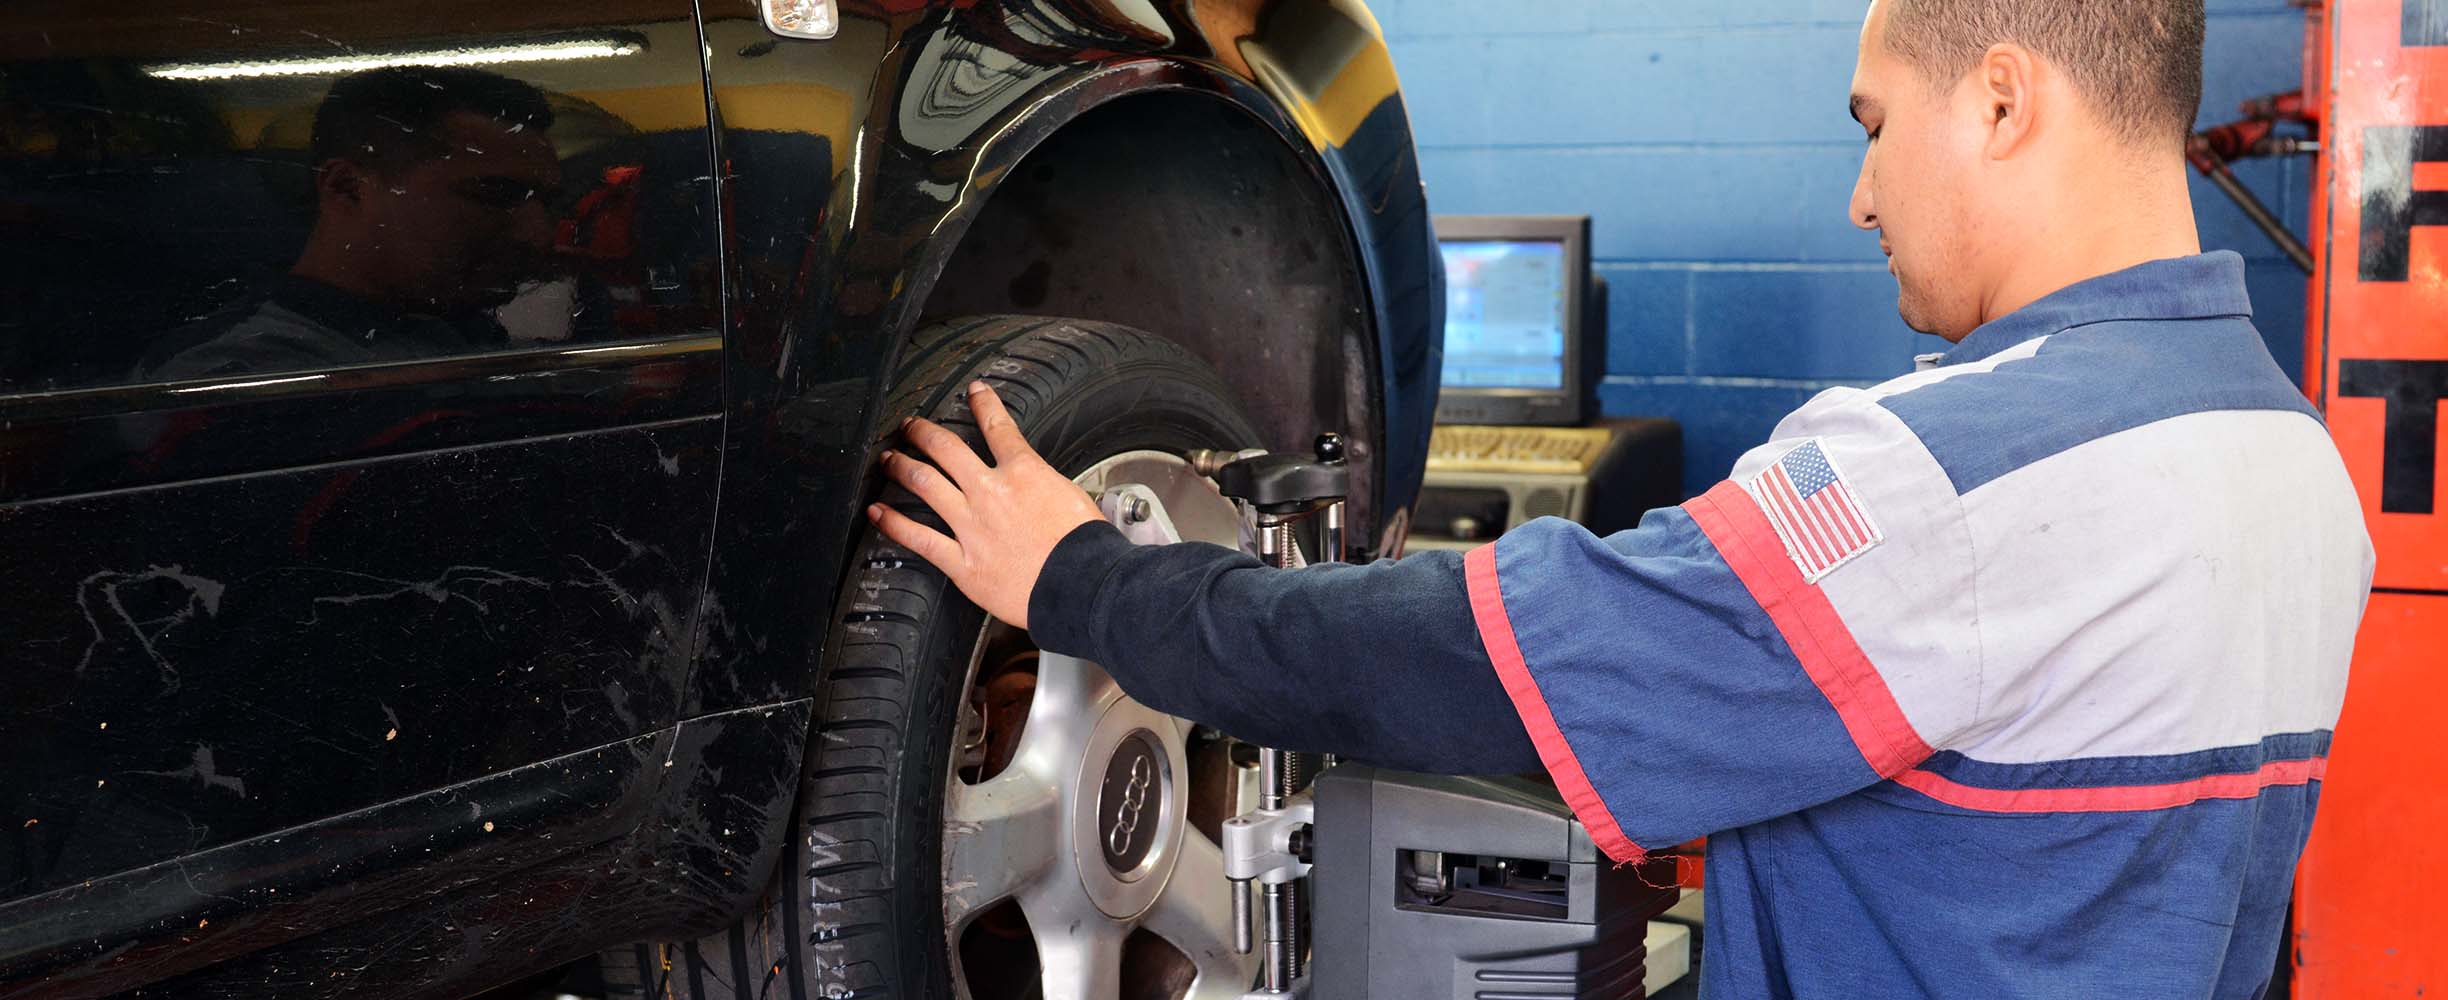 Professional auto repair and maintenance with decades of experience and dozens of professional mechanic courses.